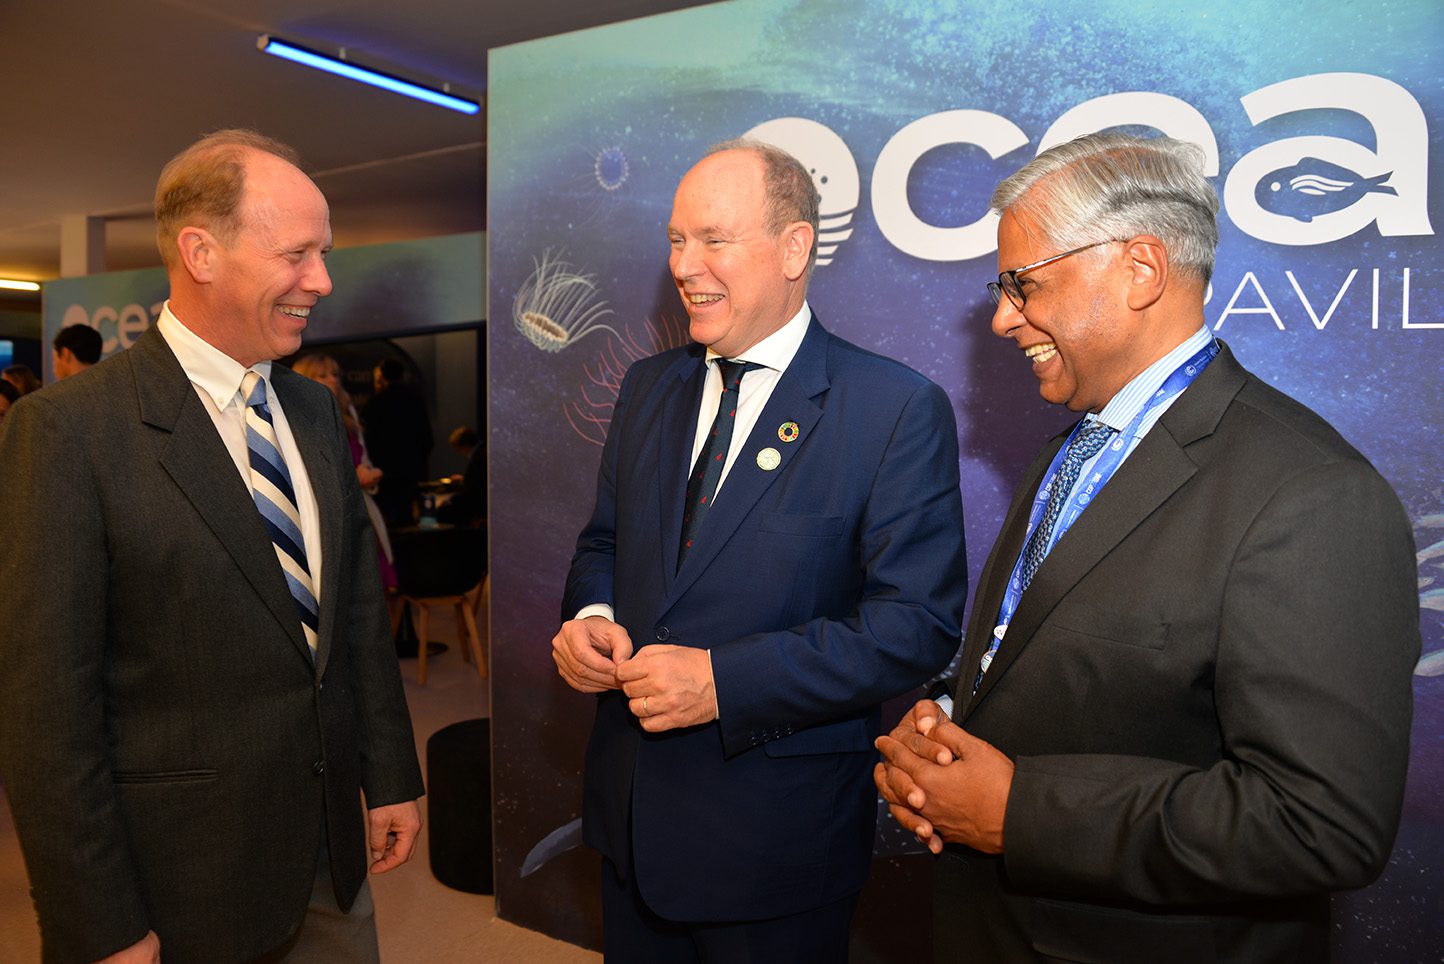 His Serene Highness the Sovereign Prince of Monaco (center) talks with WHOI President Peter de Menocal (left) and Director of the WHOI Marine Policy Center Dr. Kilaparti Ramakrishna (right). (Photo by Elise Hugus, © Woods Hole Oceanographic Institution)